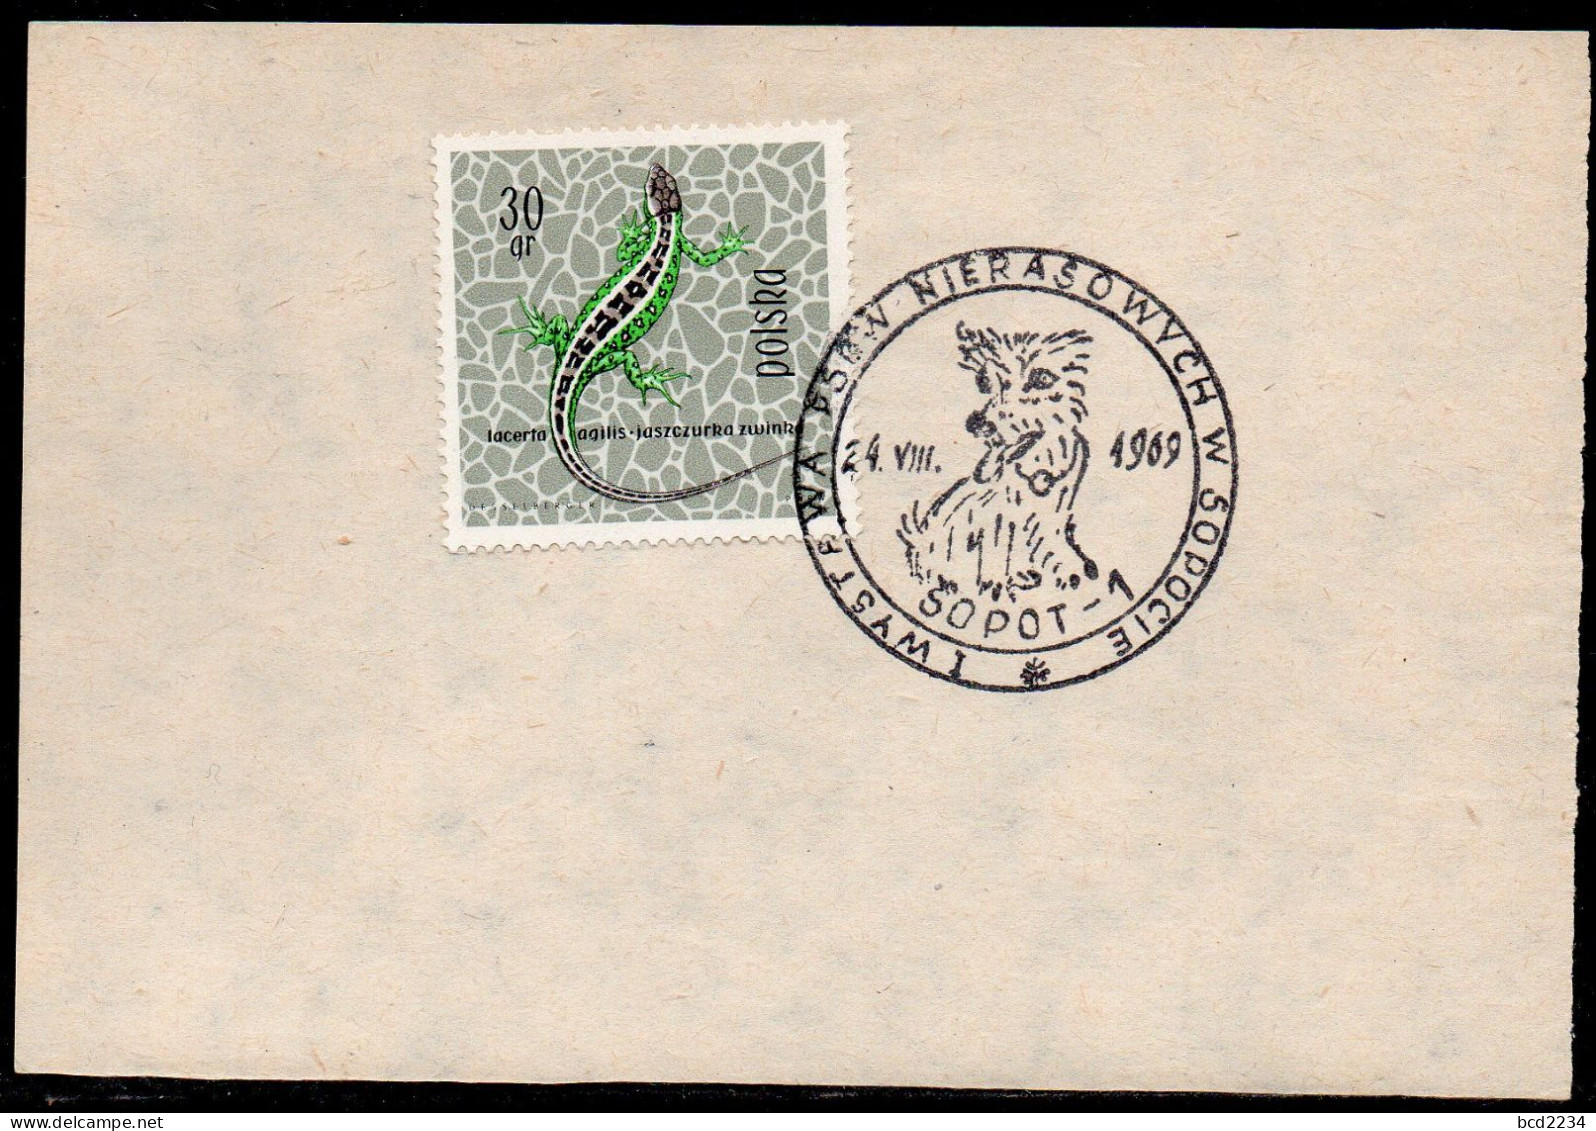 POLAND 1969 I NON-PEDIGREE DOG SHOW SOPOT SPECIAL CANCEL ON PAPER DOGS - Cani